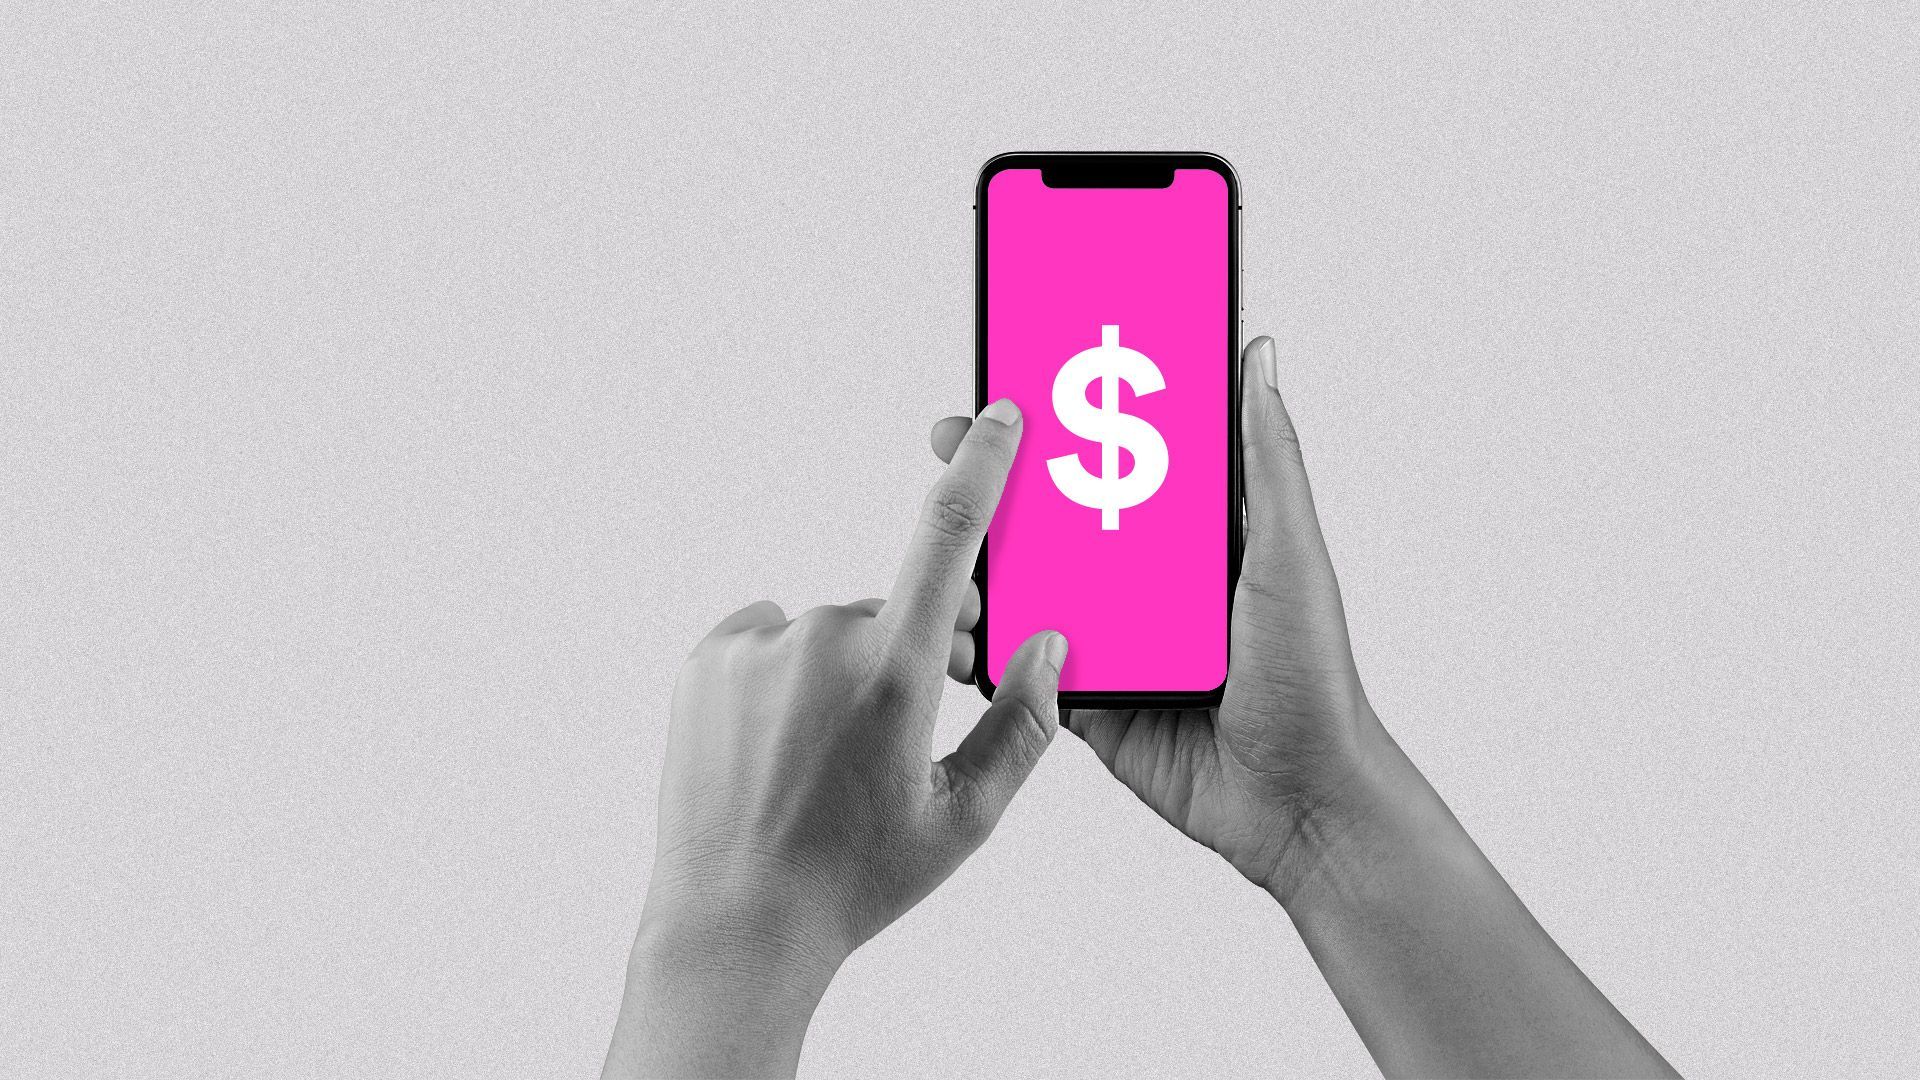 A hand holding a phone showing the Lyft app with a dollar sign